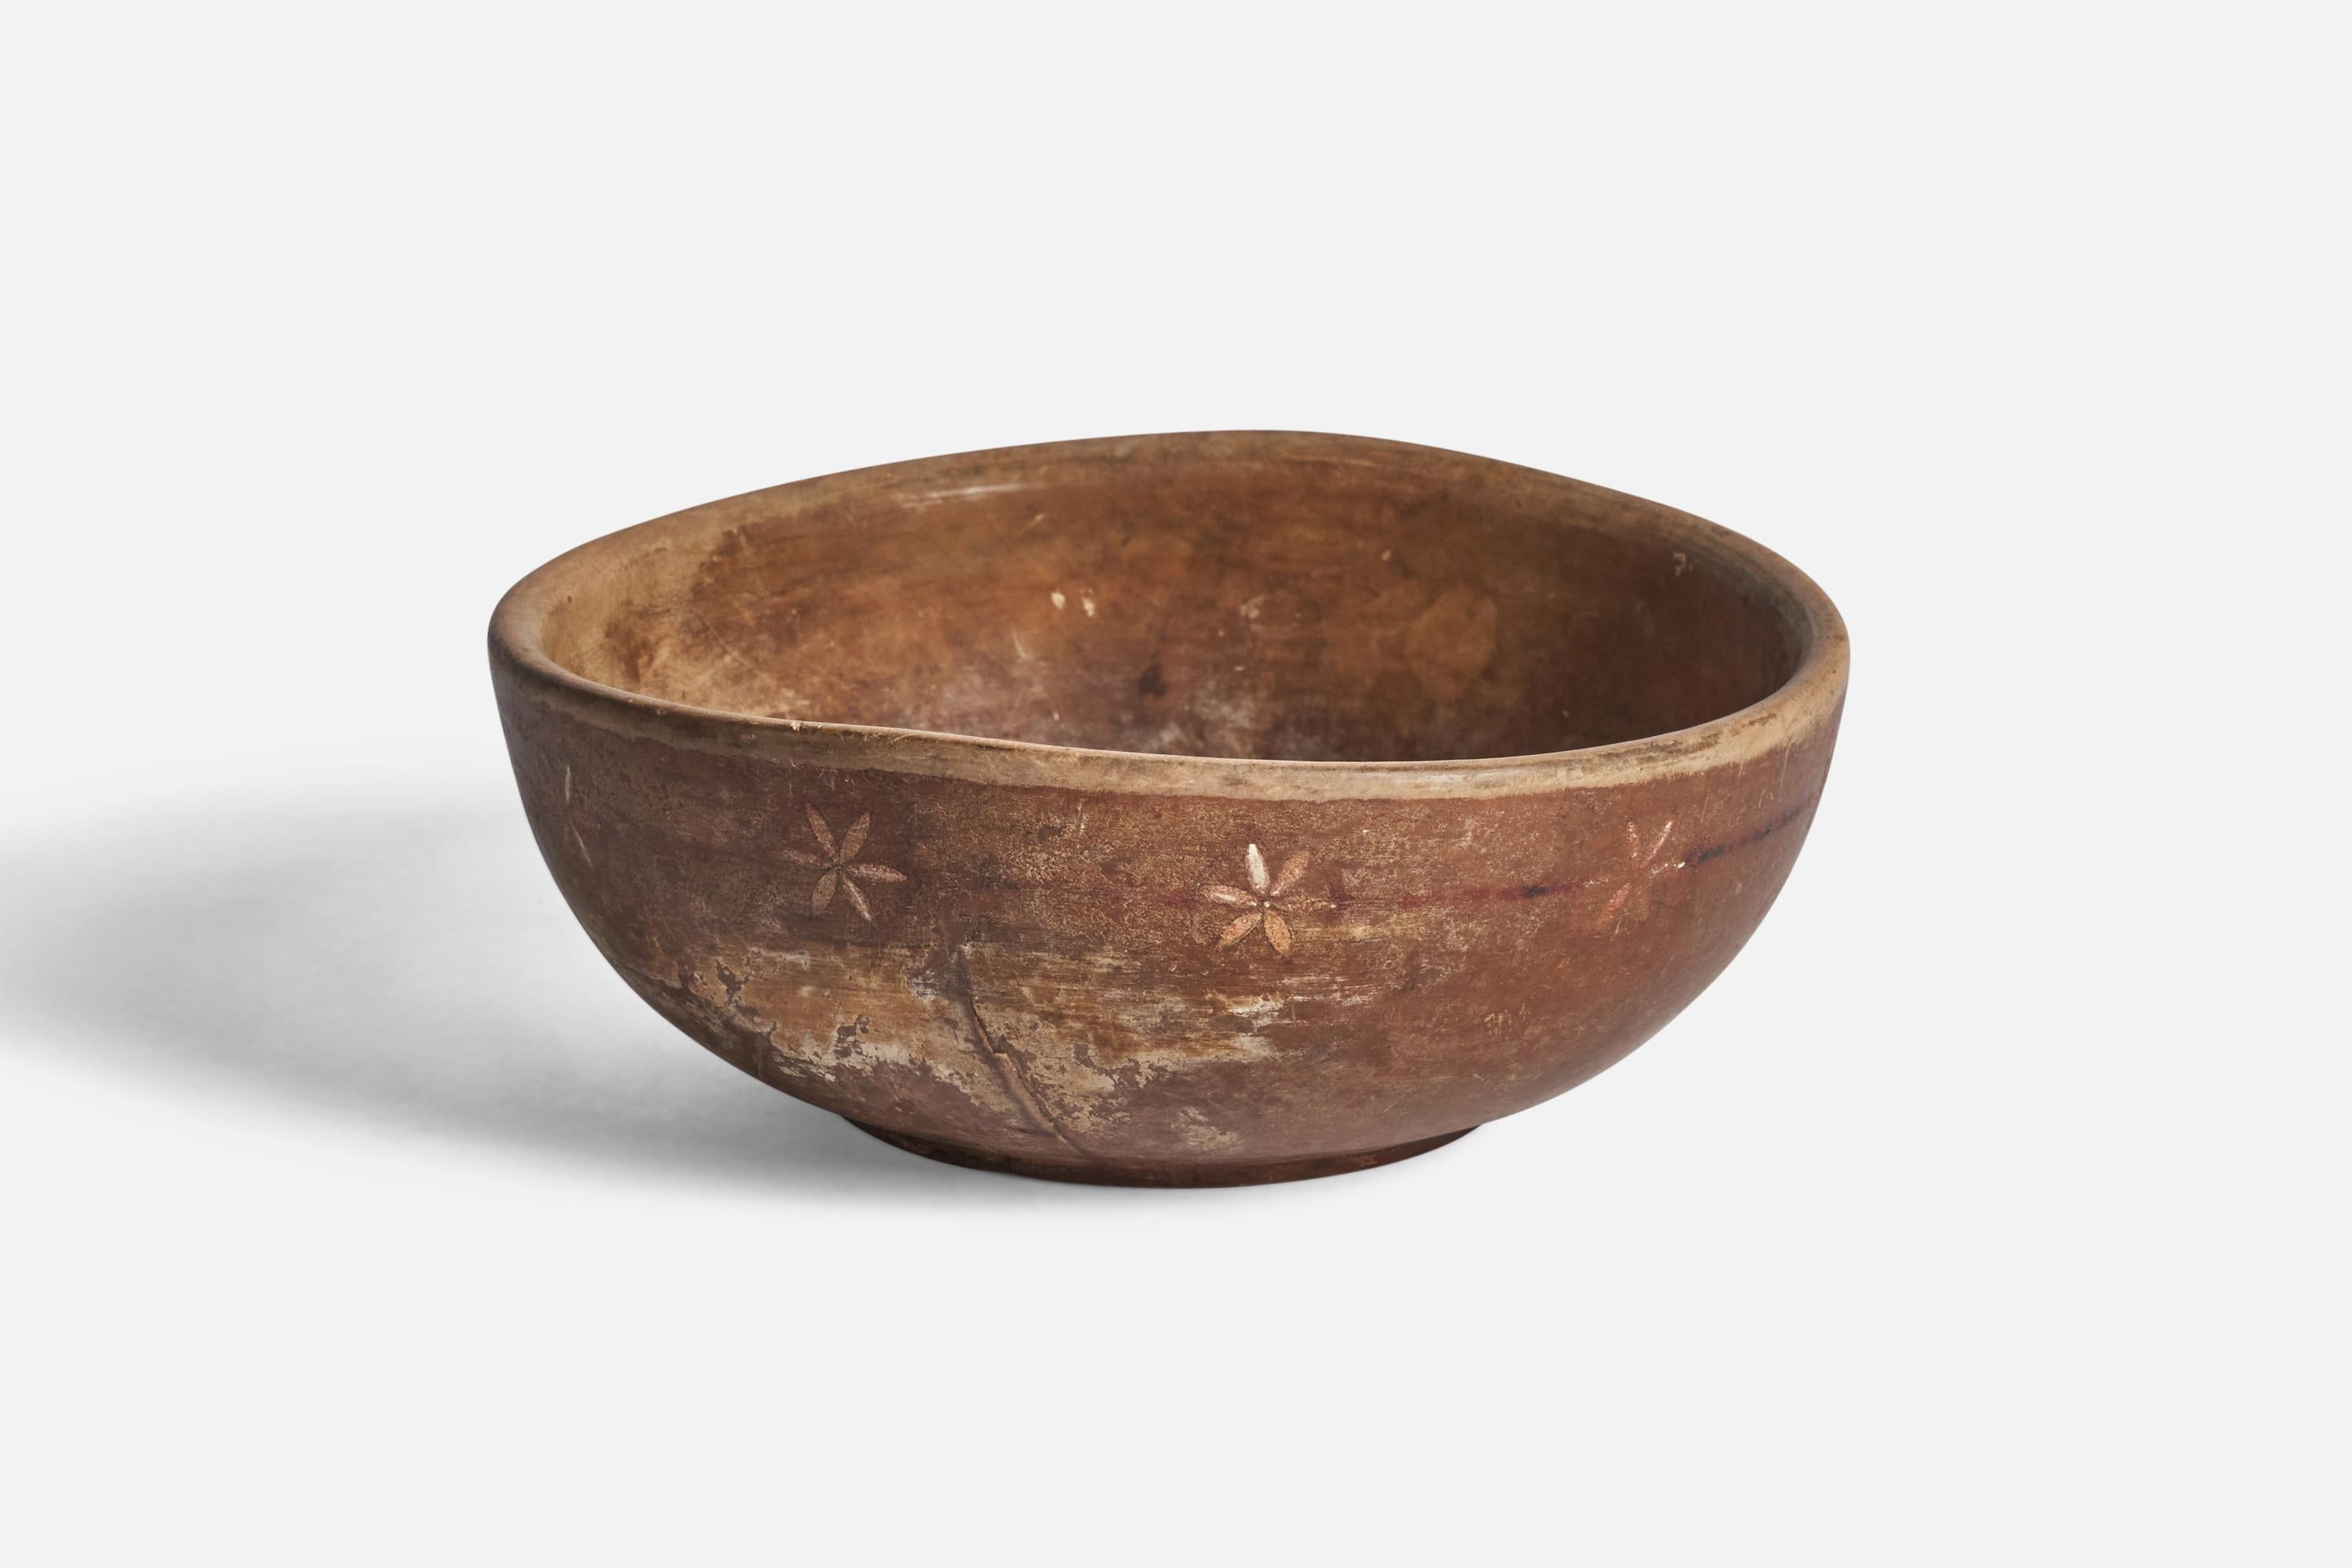 A hand-painted wood bowl produced in Sweden, 19th century.